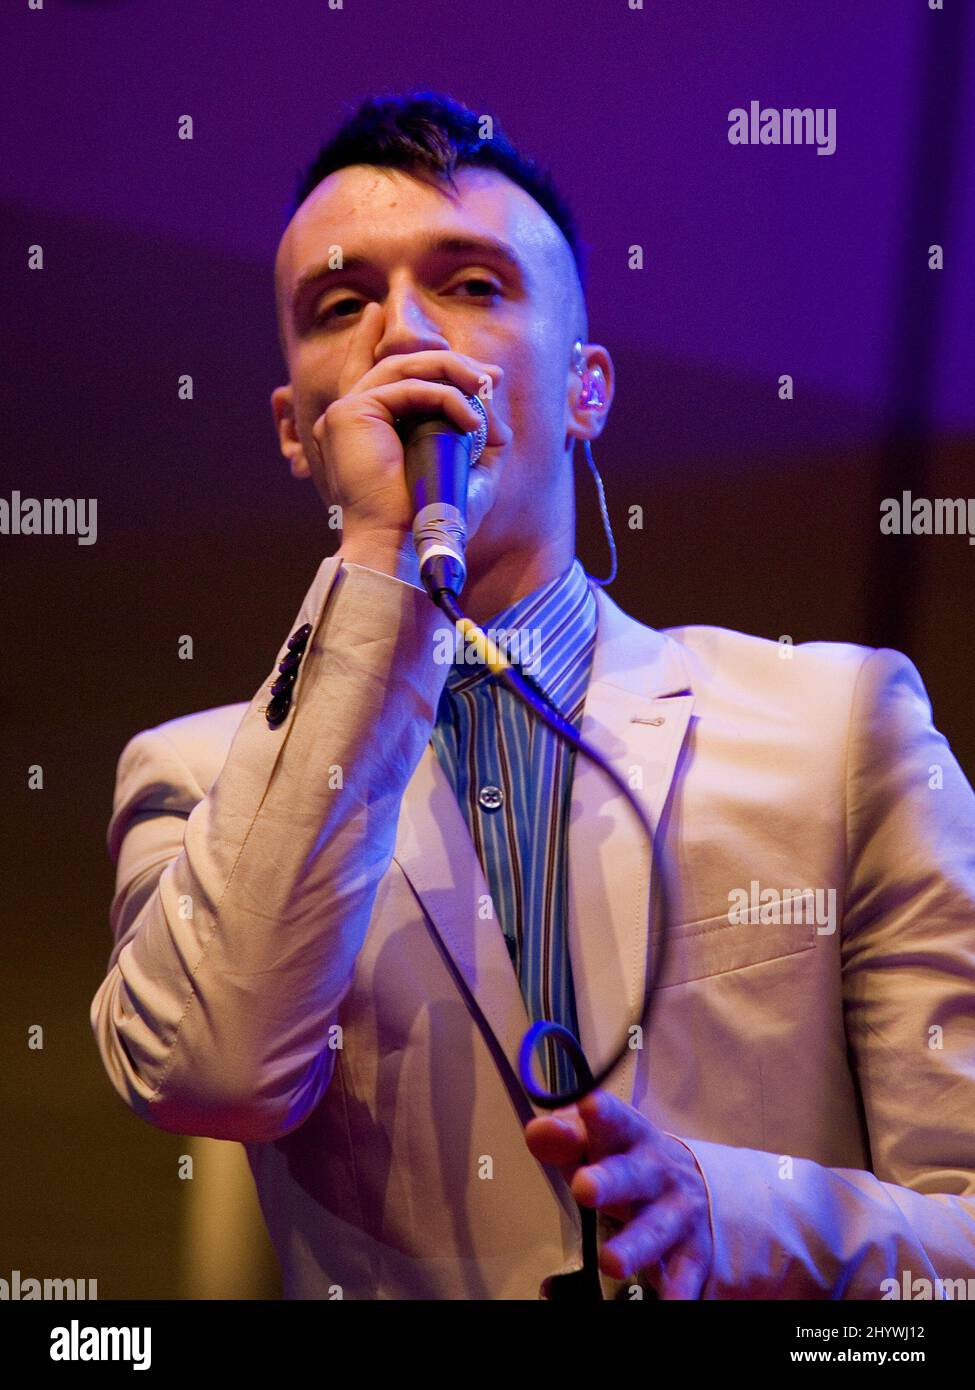 FrankMusik performs a free gig at the Westfield Shopping Centre in London as part of a series of summer gigs. Stock Photo